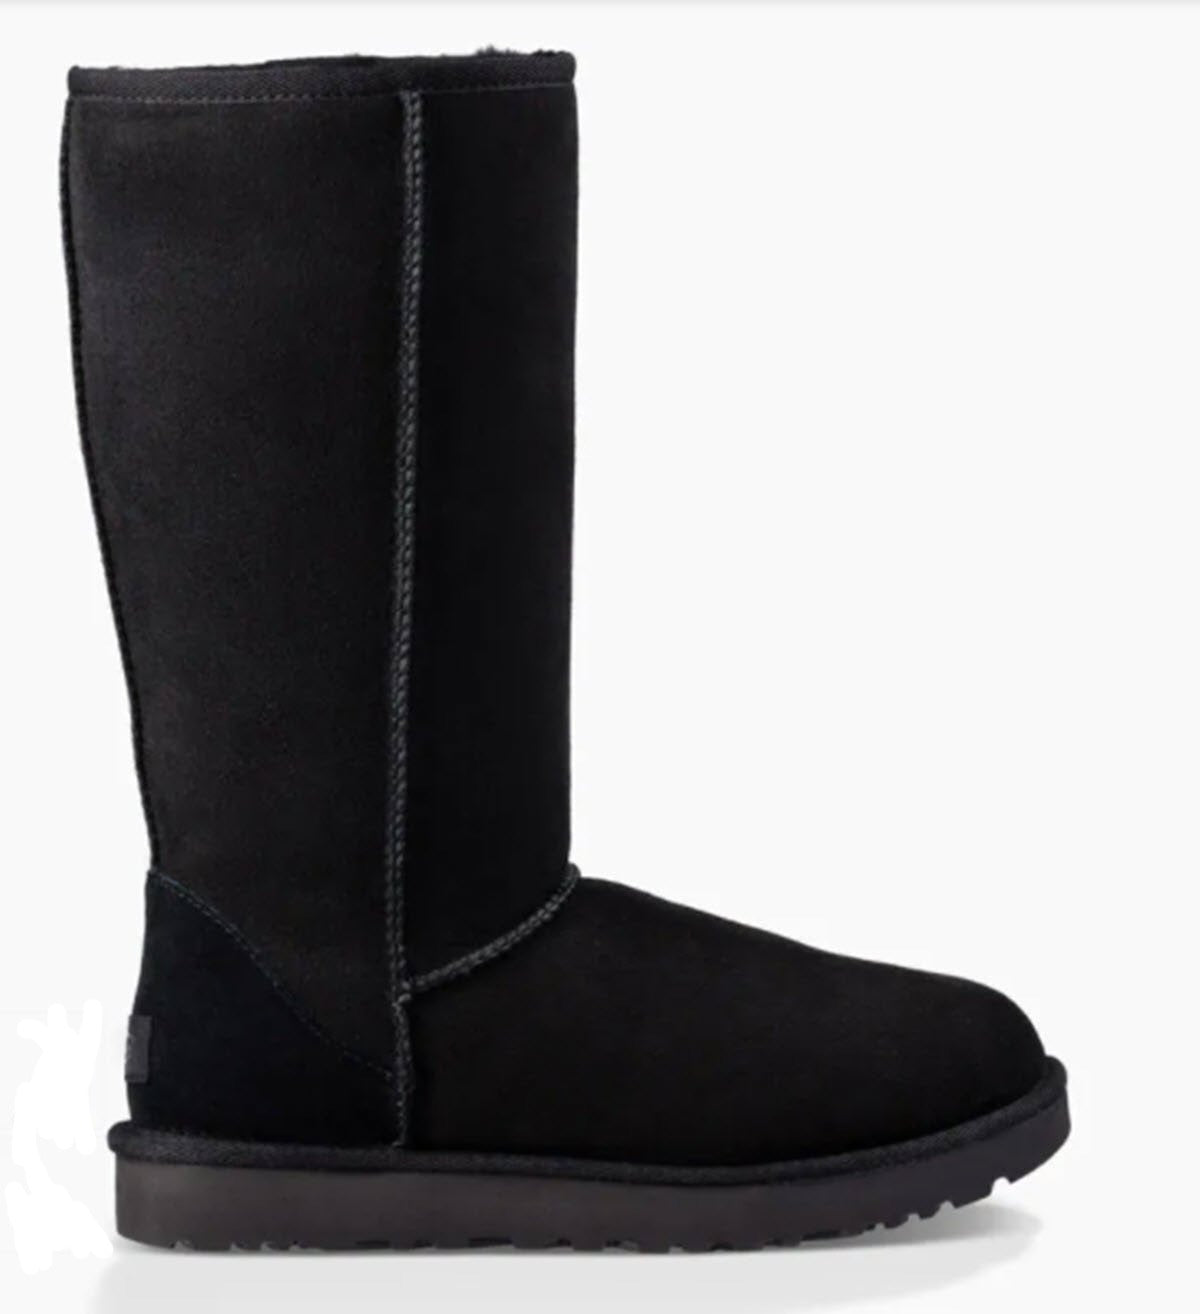 The Ugg Classic Tall Boot in Black